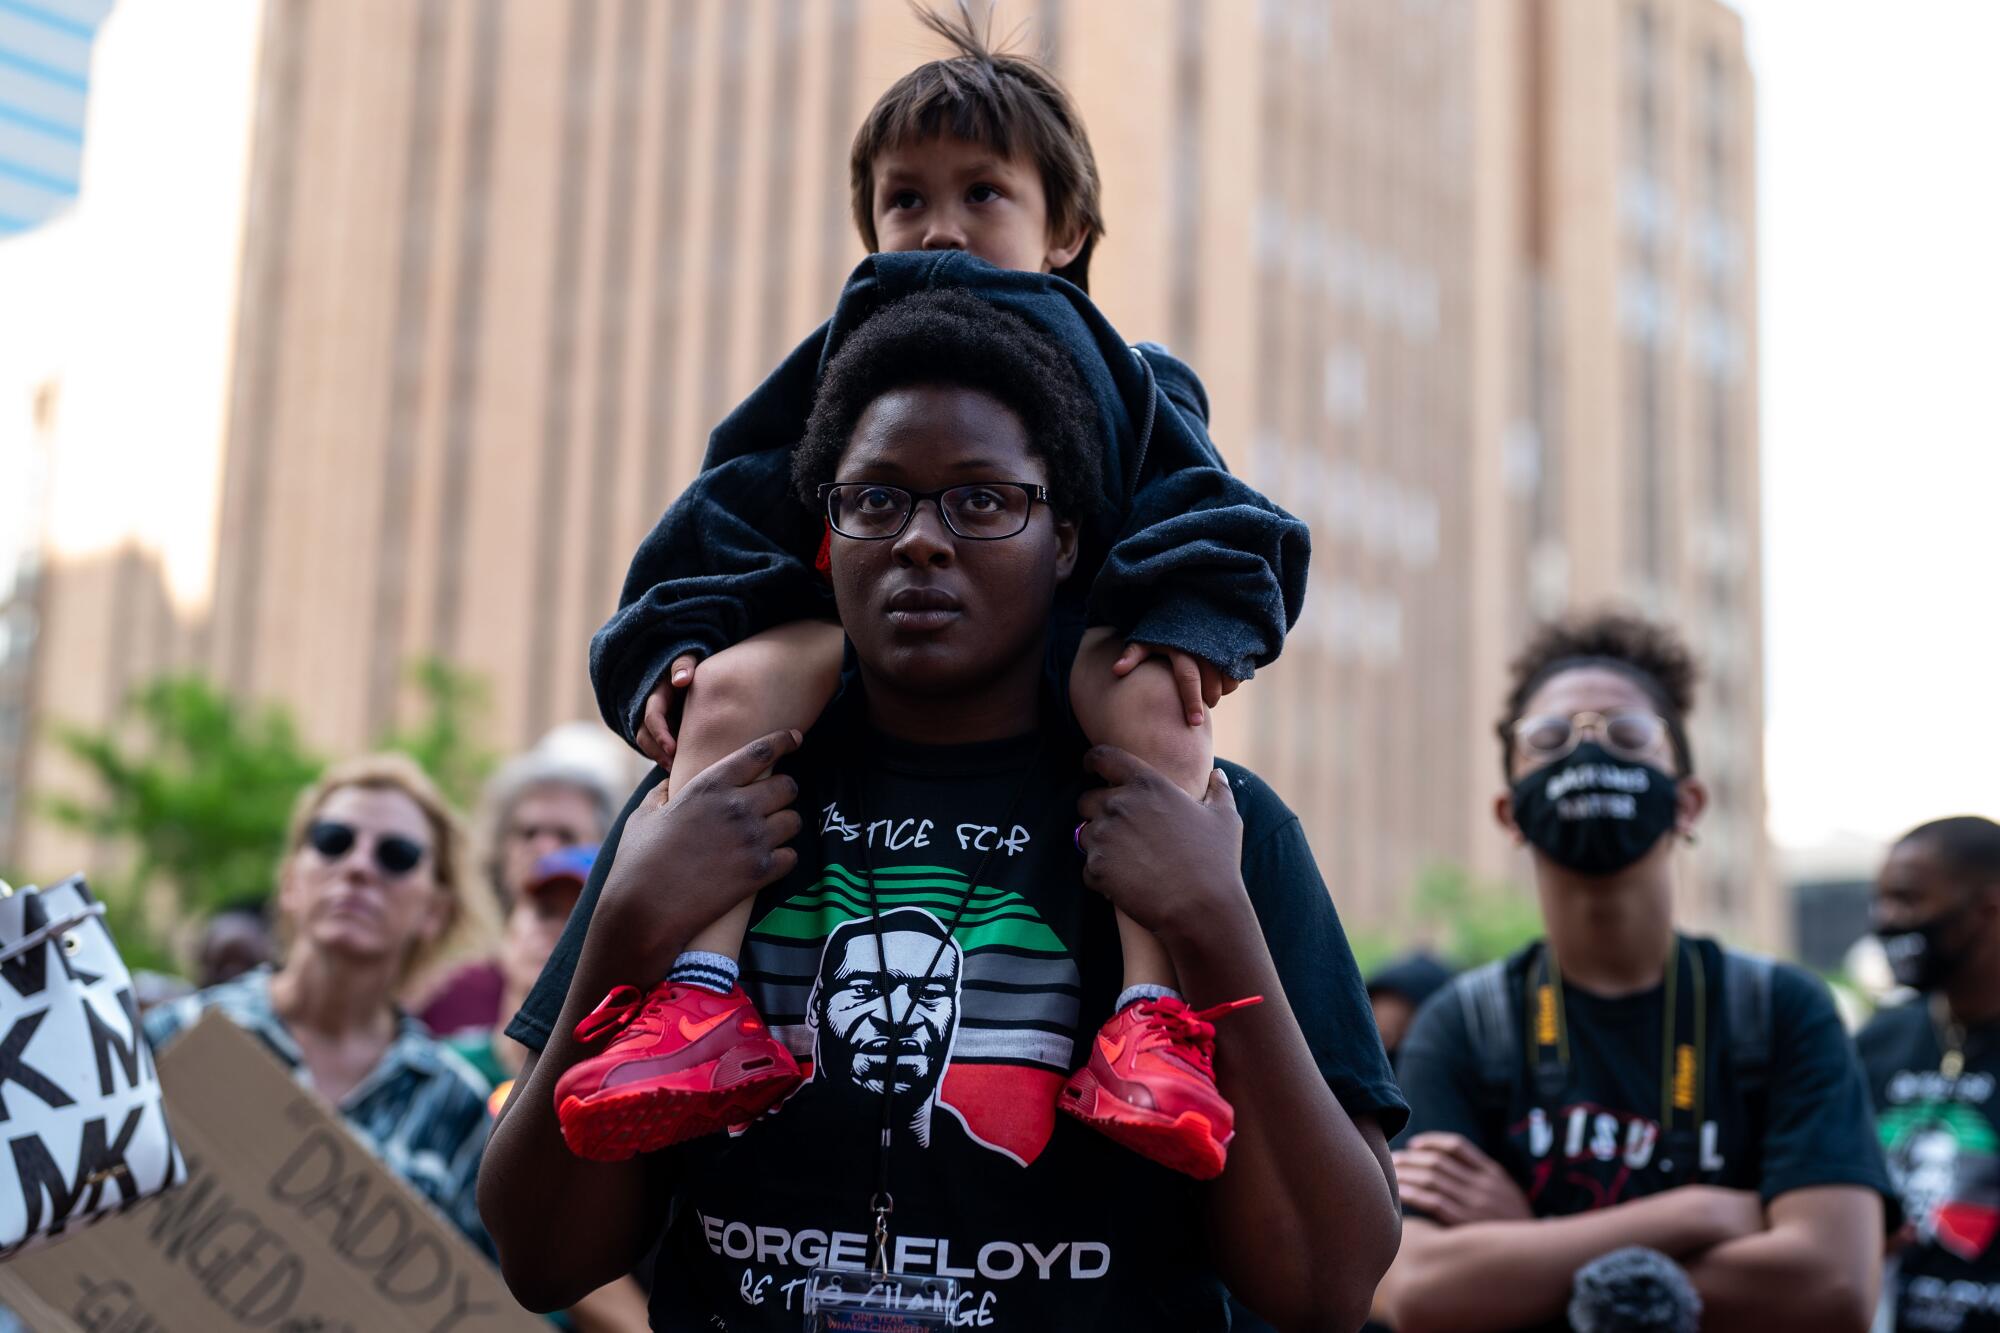 Alexis Rodgers, 21, of Minneapolis, with Caden, 3, on her shoulders.